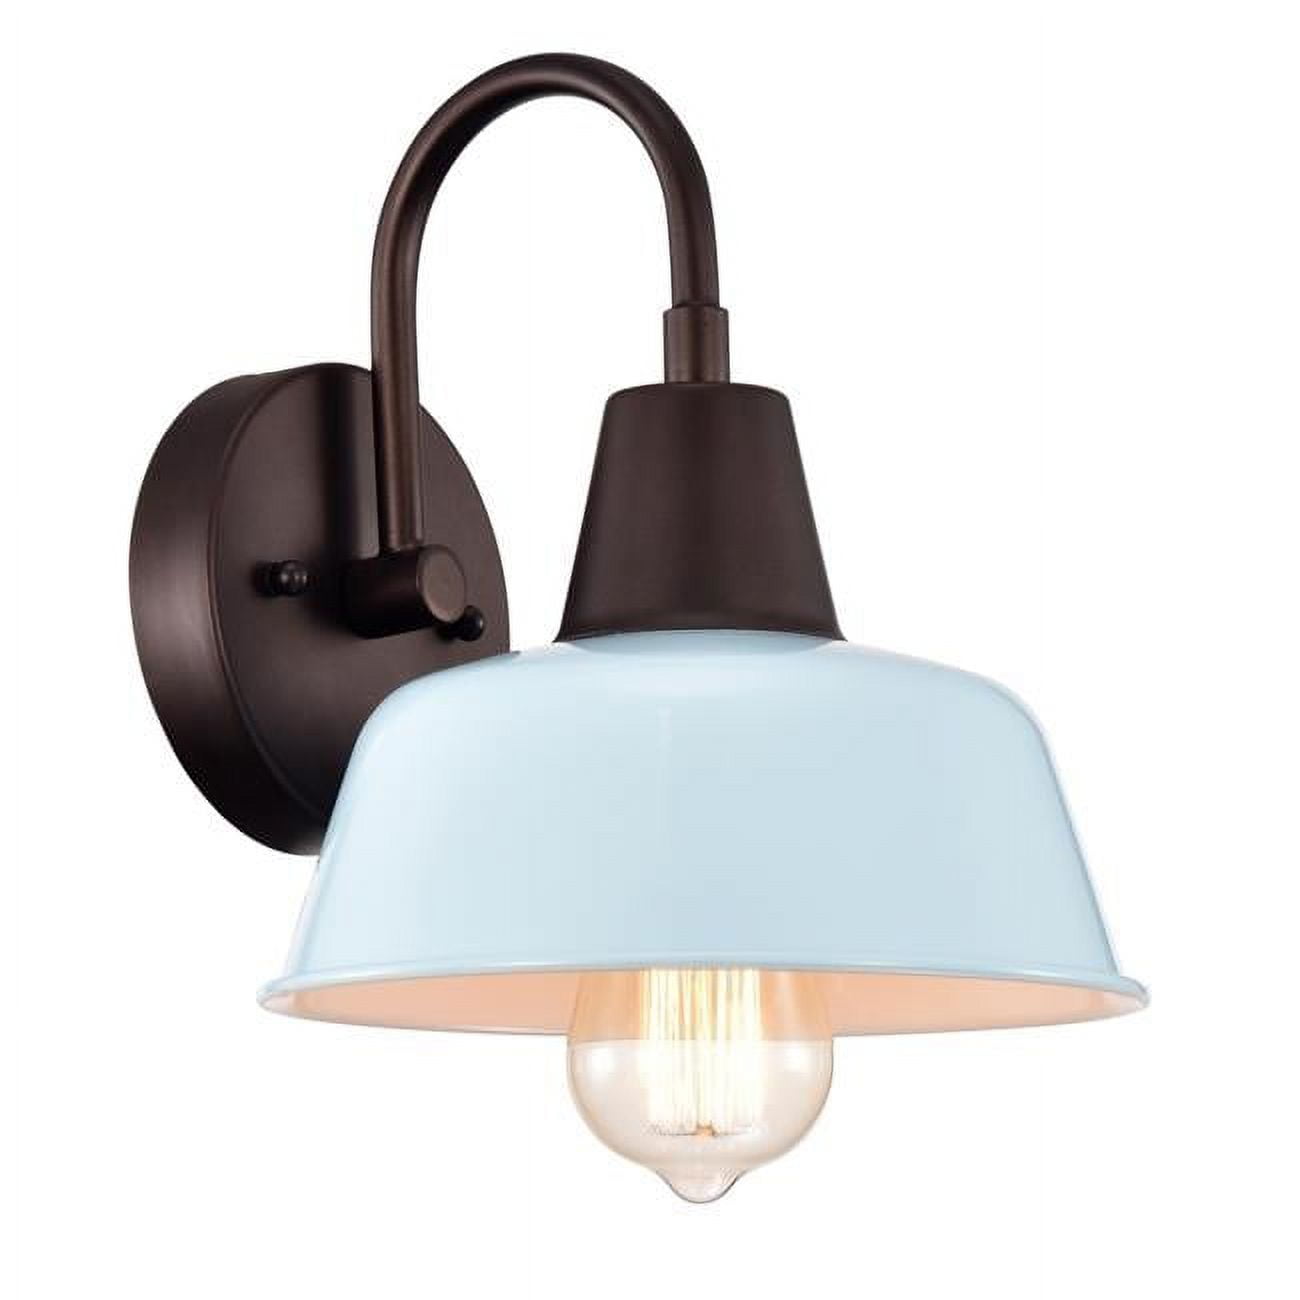 Picture of Chloe Lighting CH2D701LB09-WS1 9 in. Ironclad Industrial 1 Light Indoor Wall Sconce, Oil Rubbed Bronze